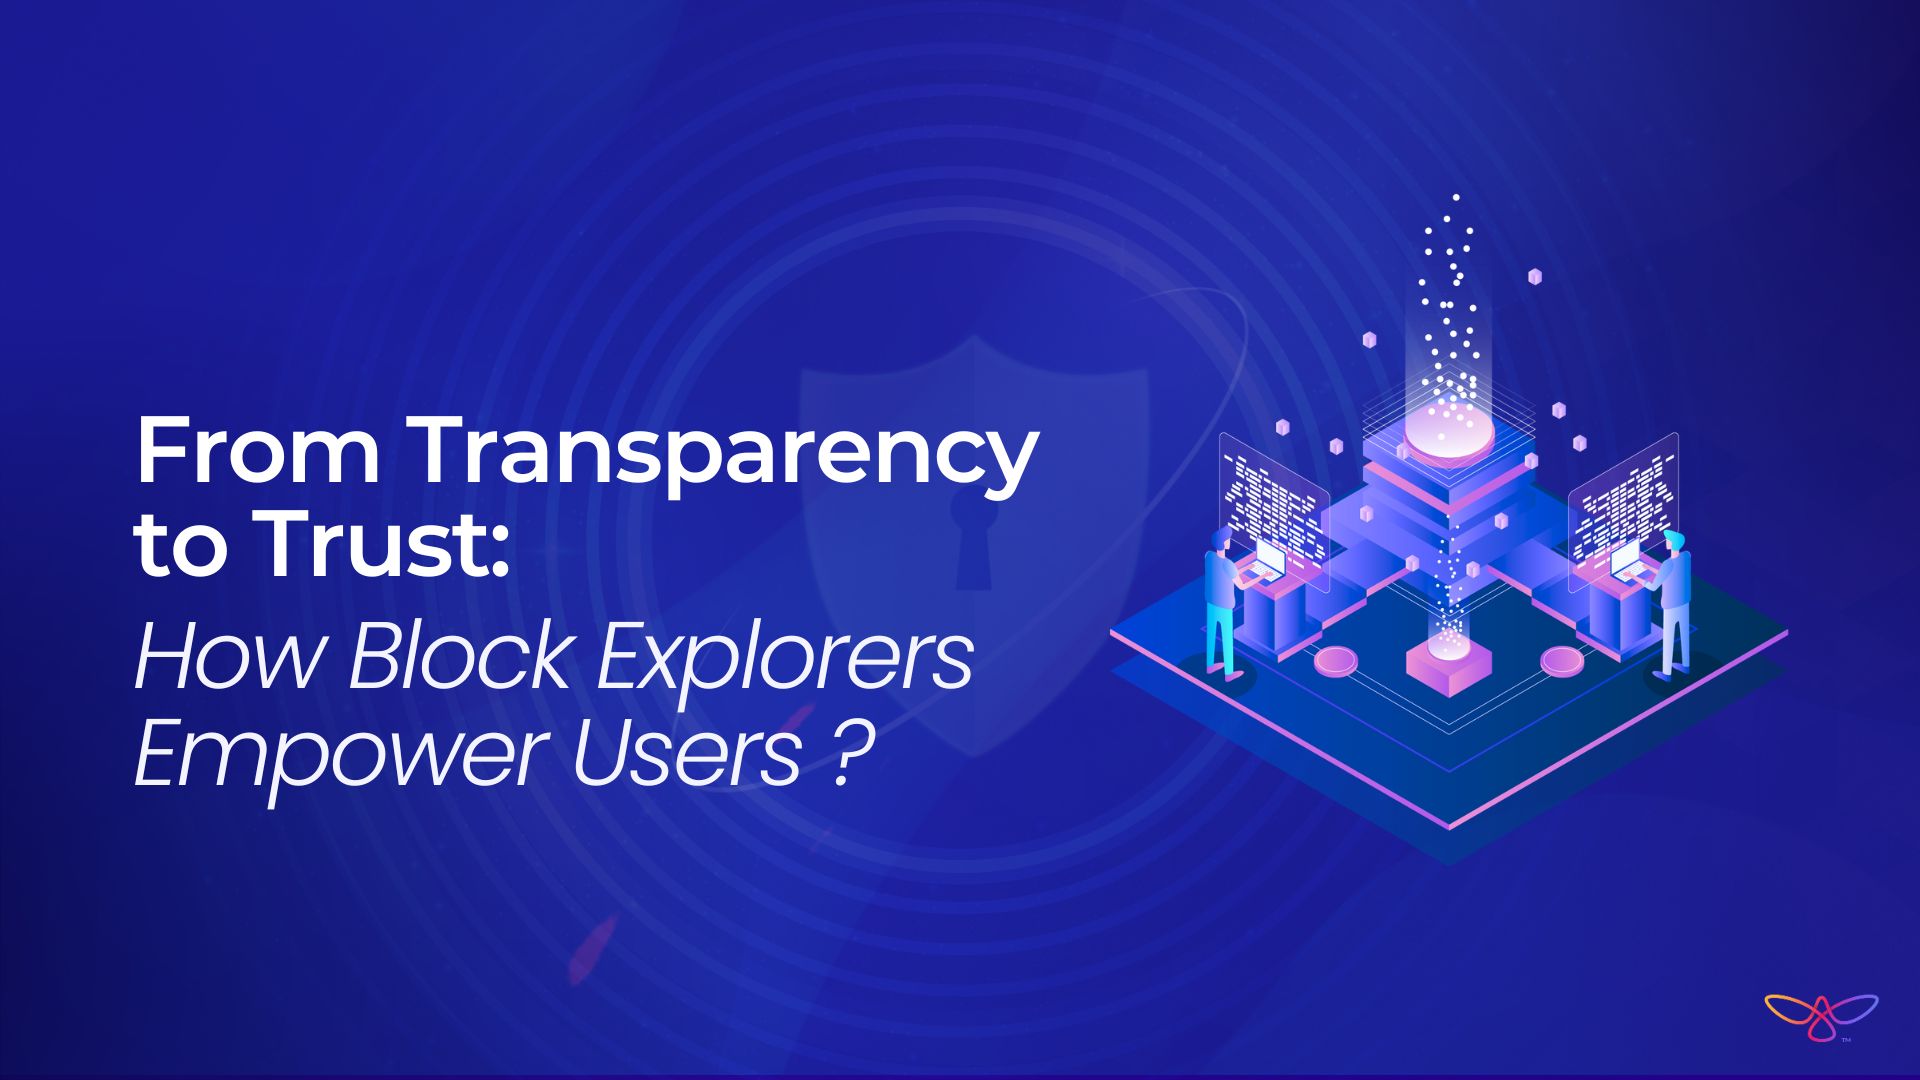 From Transparency to Trust: How Block Explorers Empower Users